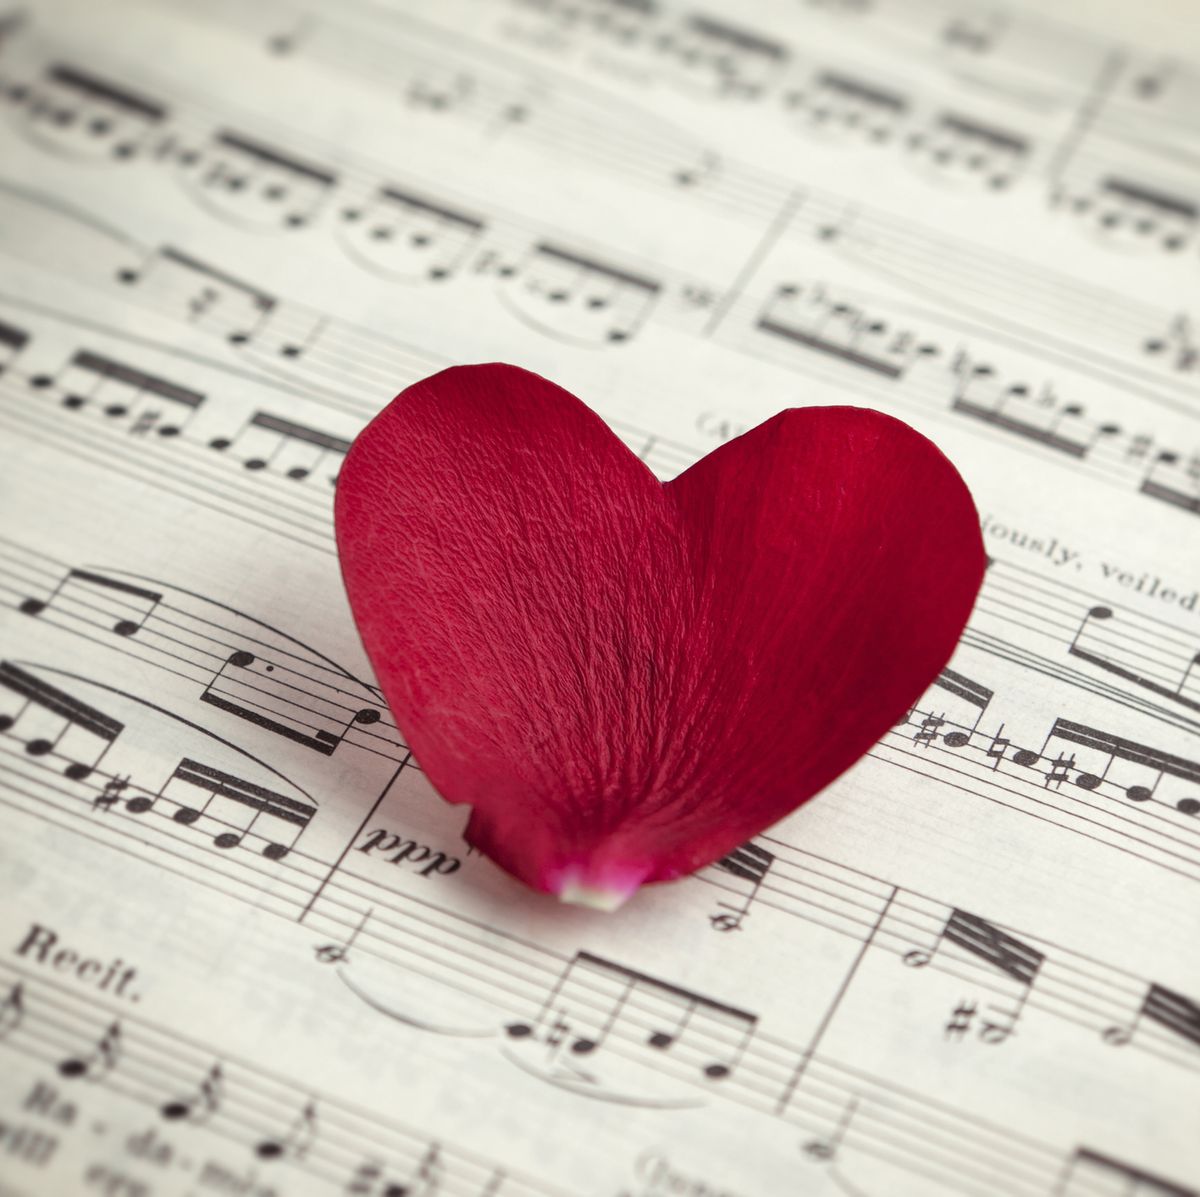 40 Best Valentine's Day Songs - Love Songs for Valentine's Day